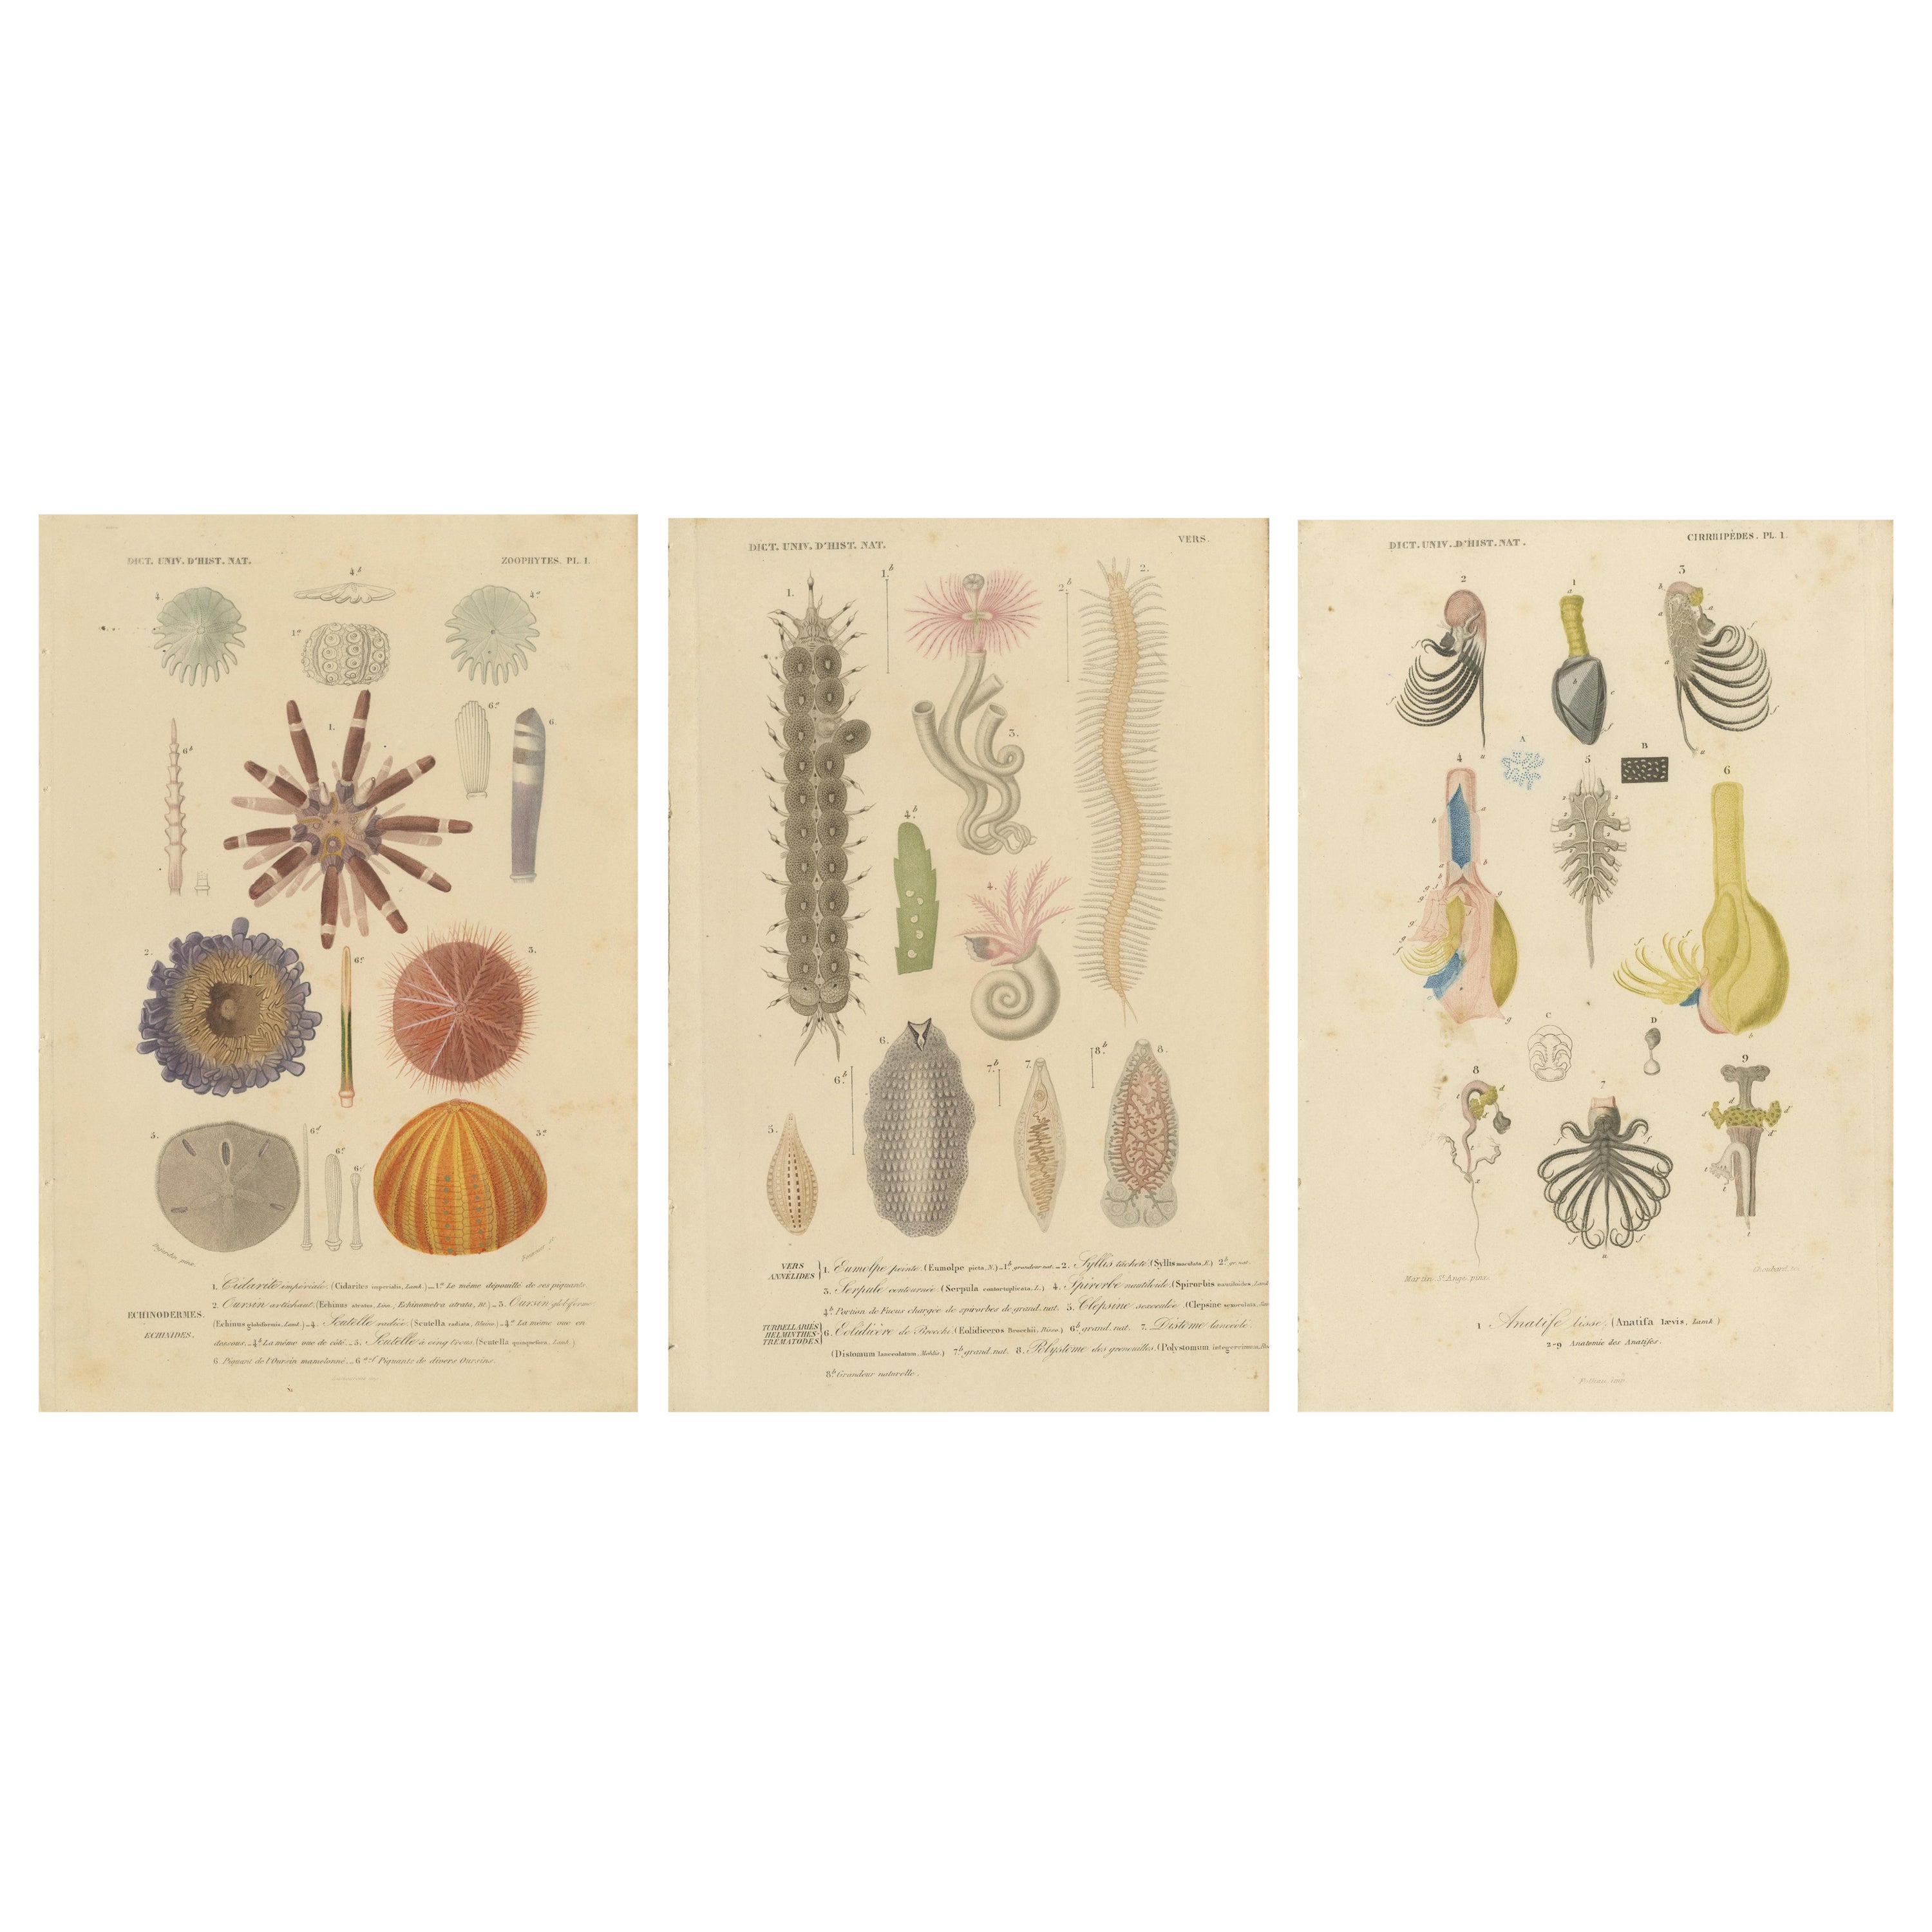 19th Century Marine Life: d'Orbigny's Illustrated Gems in Old Hand-Coloring For Sale